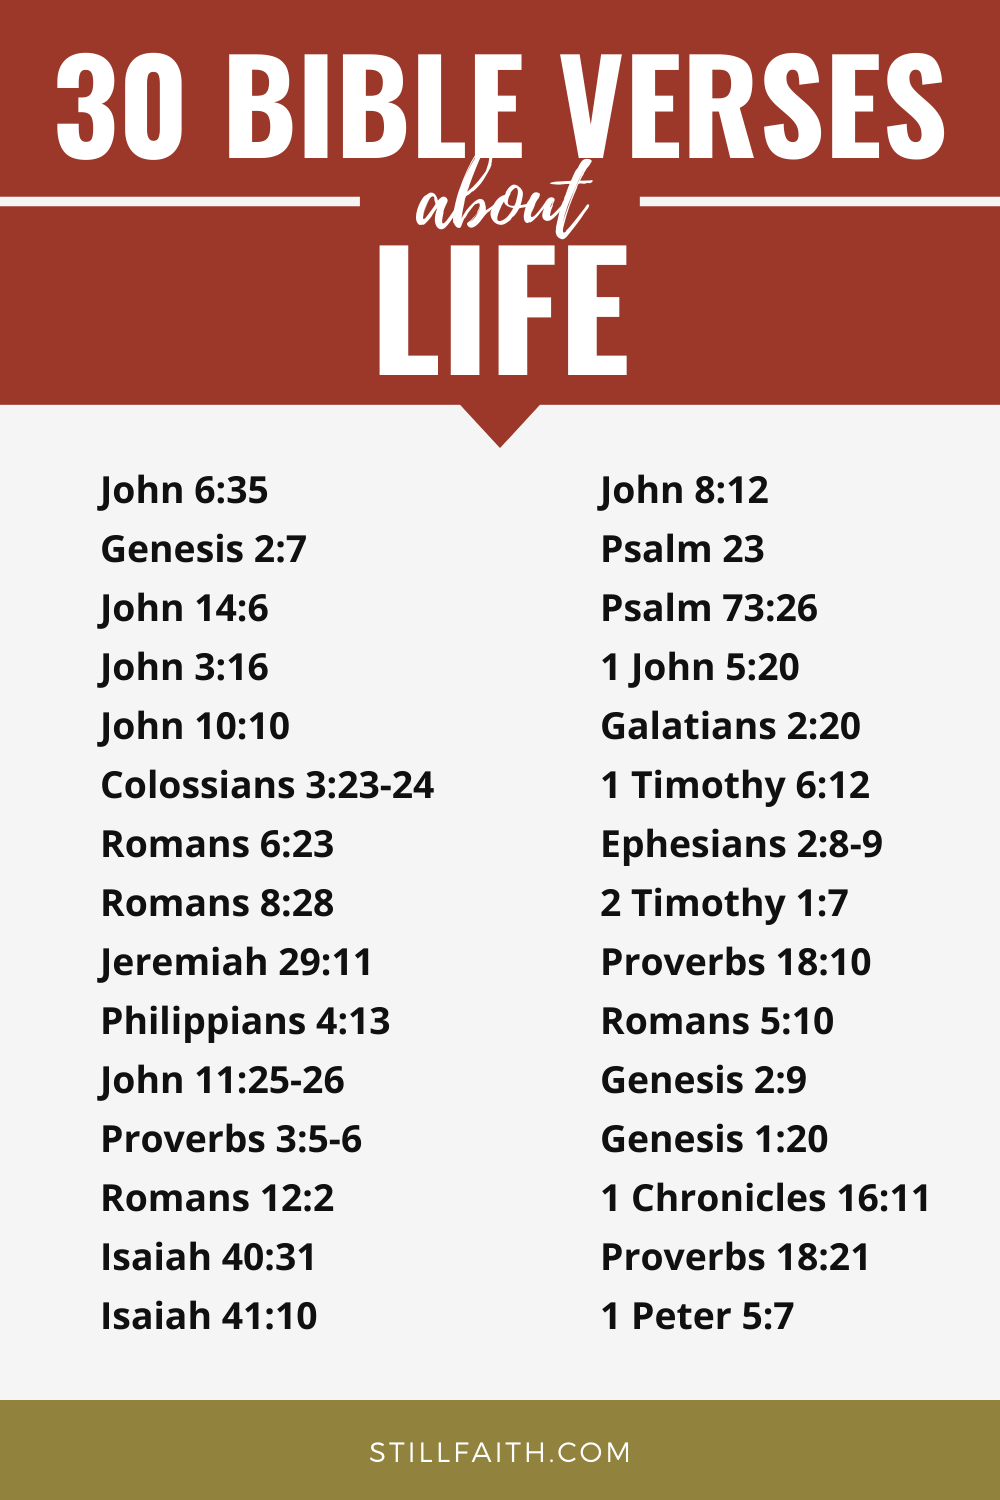 93 Bible Verses about Life